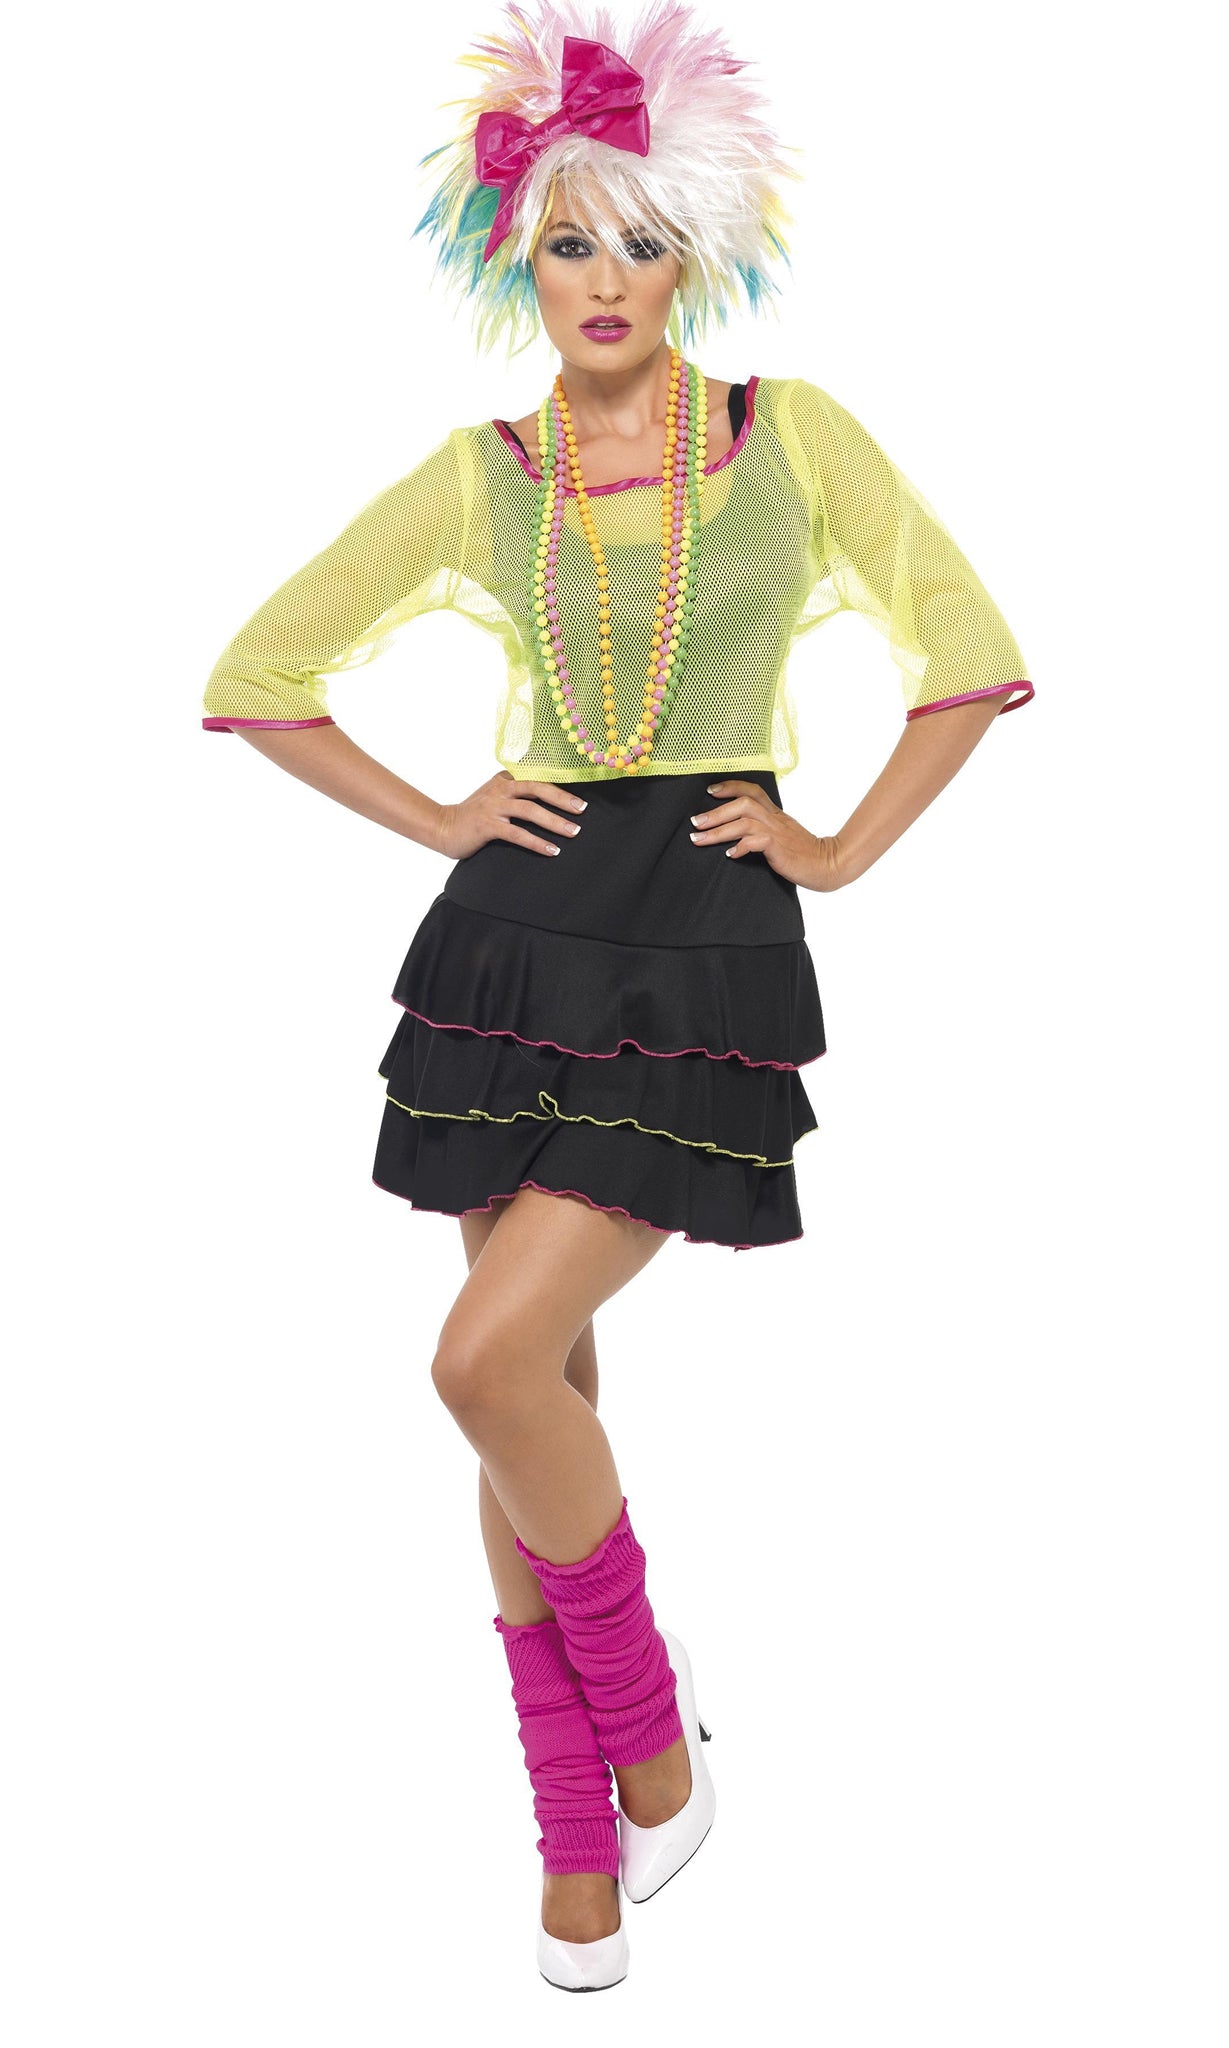 80s pop dress with green mesh top, headband, leg warmers and neon necklace